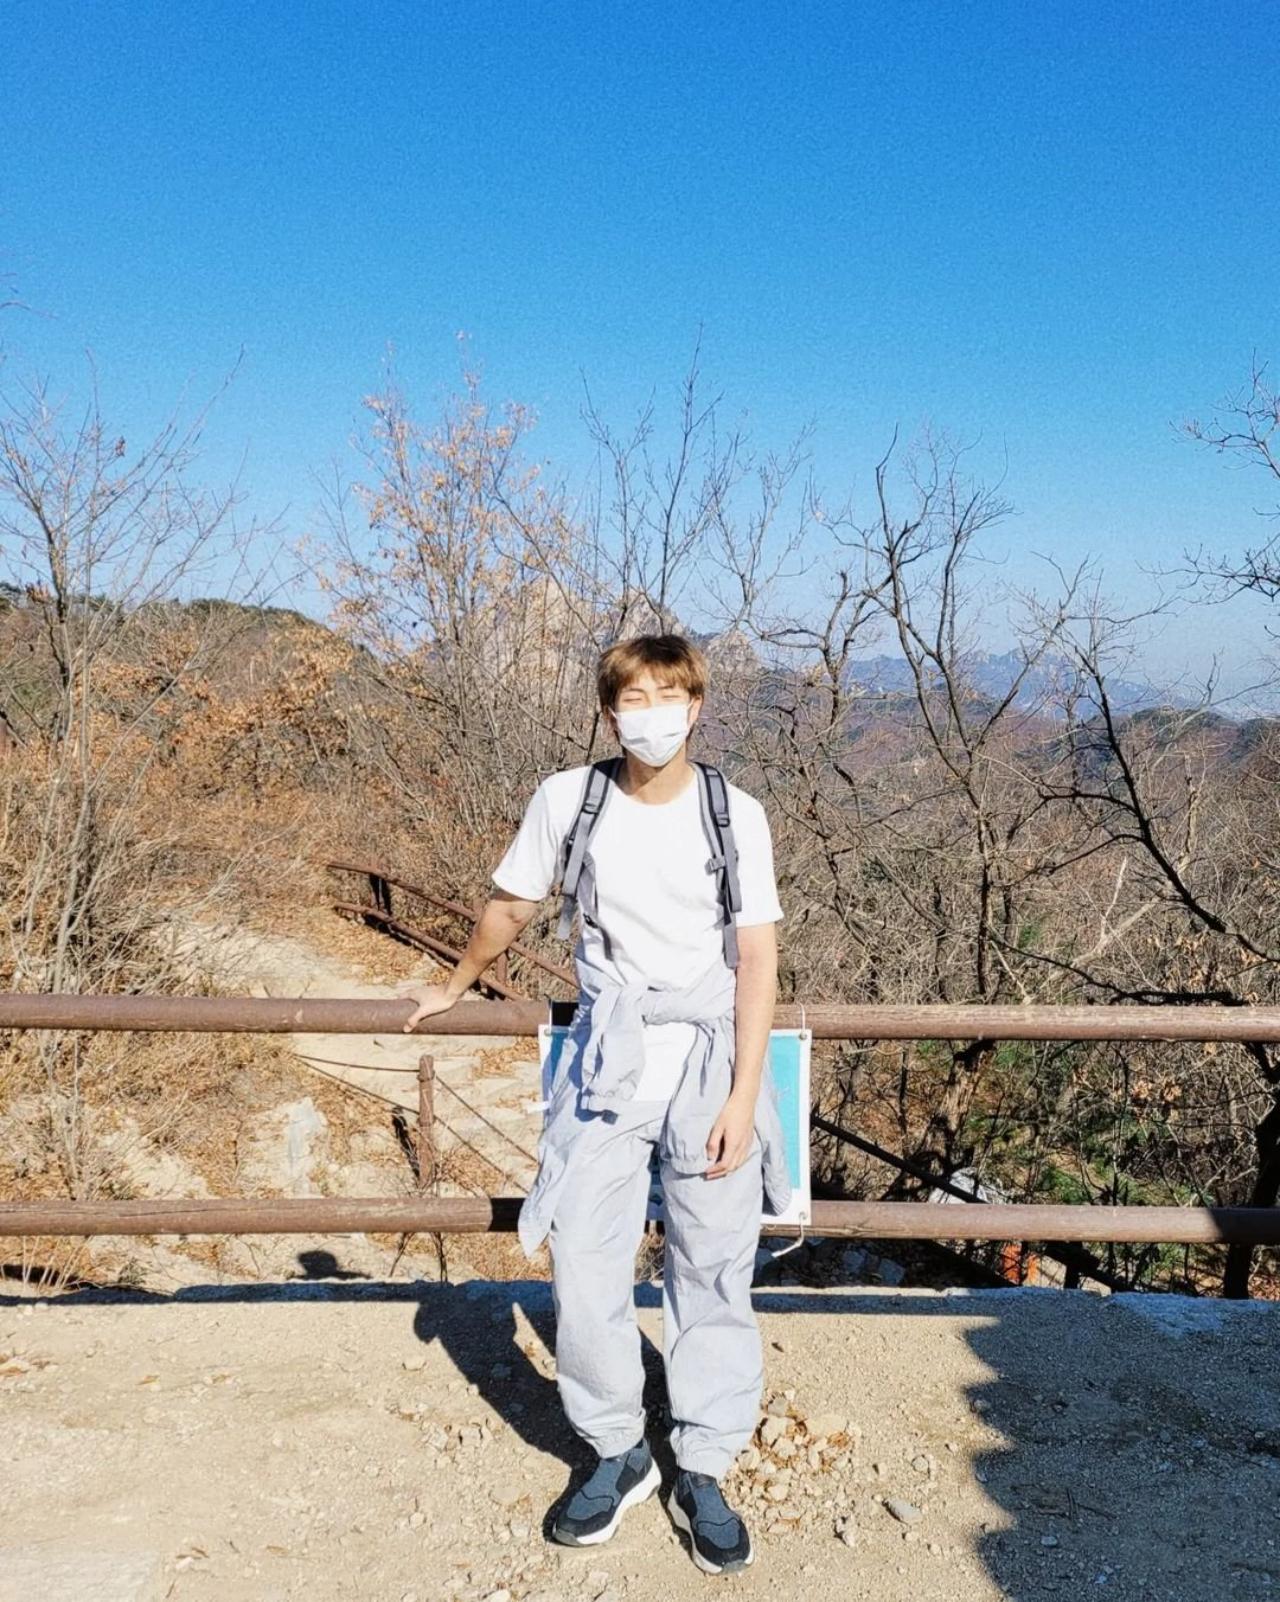 Given his love for the outdoors, Namjoon has said that he enjoys bicycling and hiking to get away from the rush hours of Seoul. He looks all ready for a trek in this simple white t-shirt and grey sweatpants. Look at that hoodies just nonchalantly tied around his waist! Namjoon wasn't kidding when he said that BTS are just a group of '20 something year old guys'